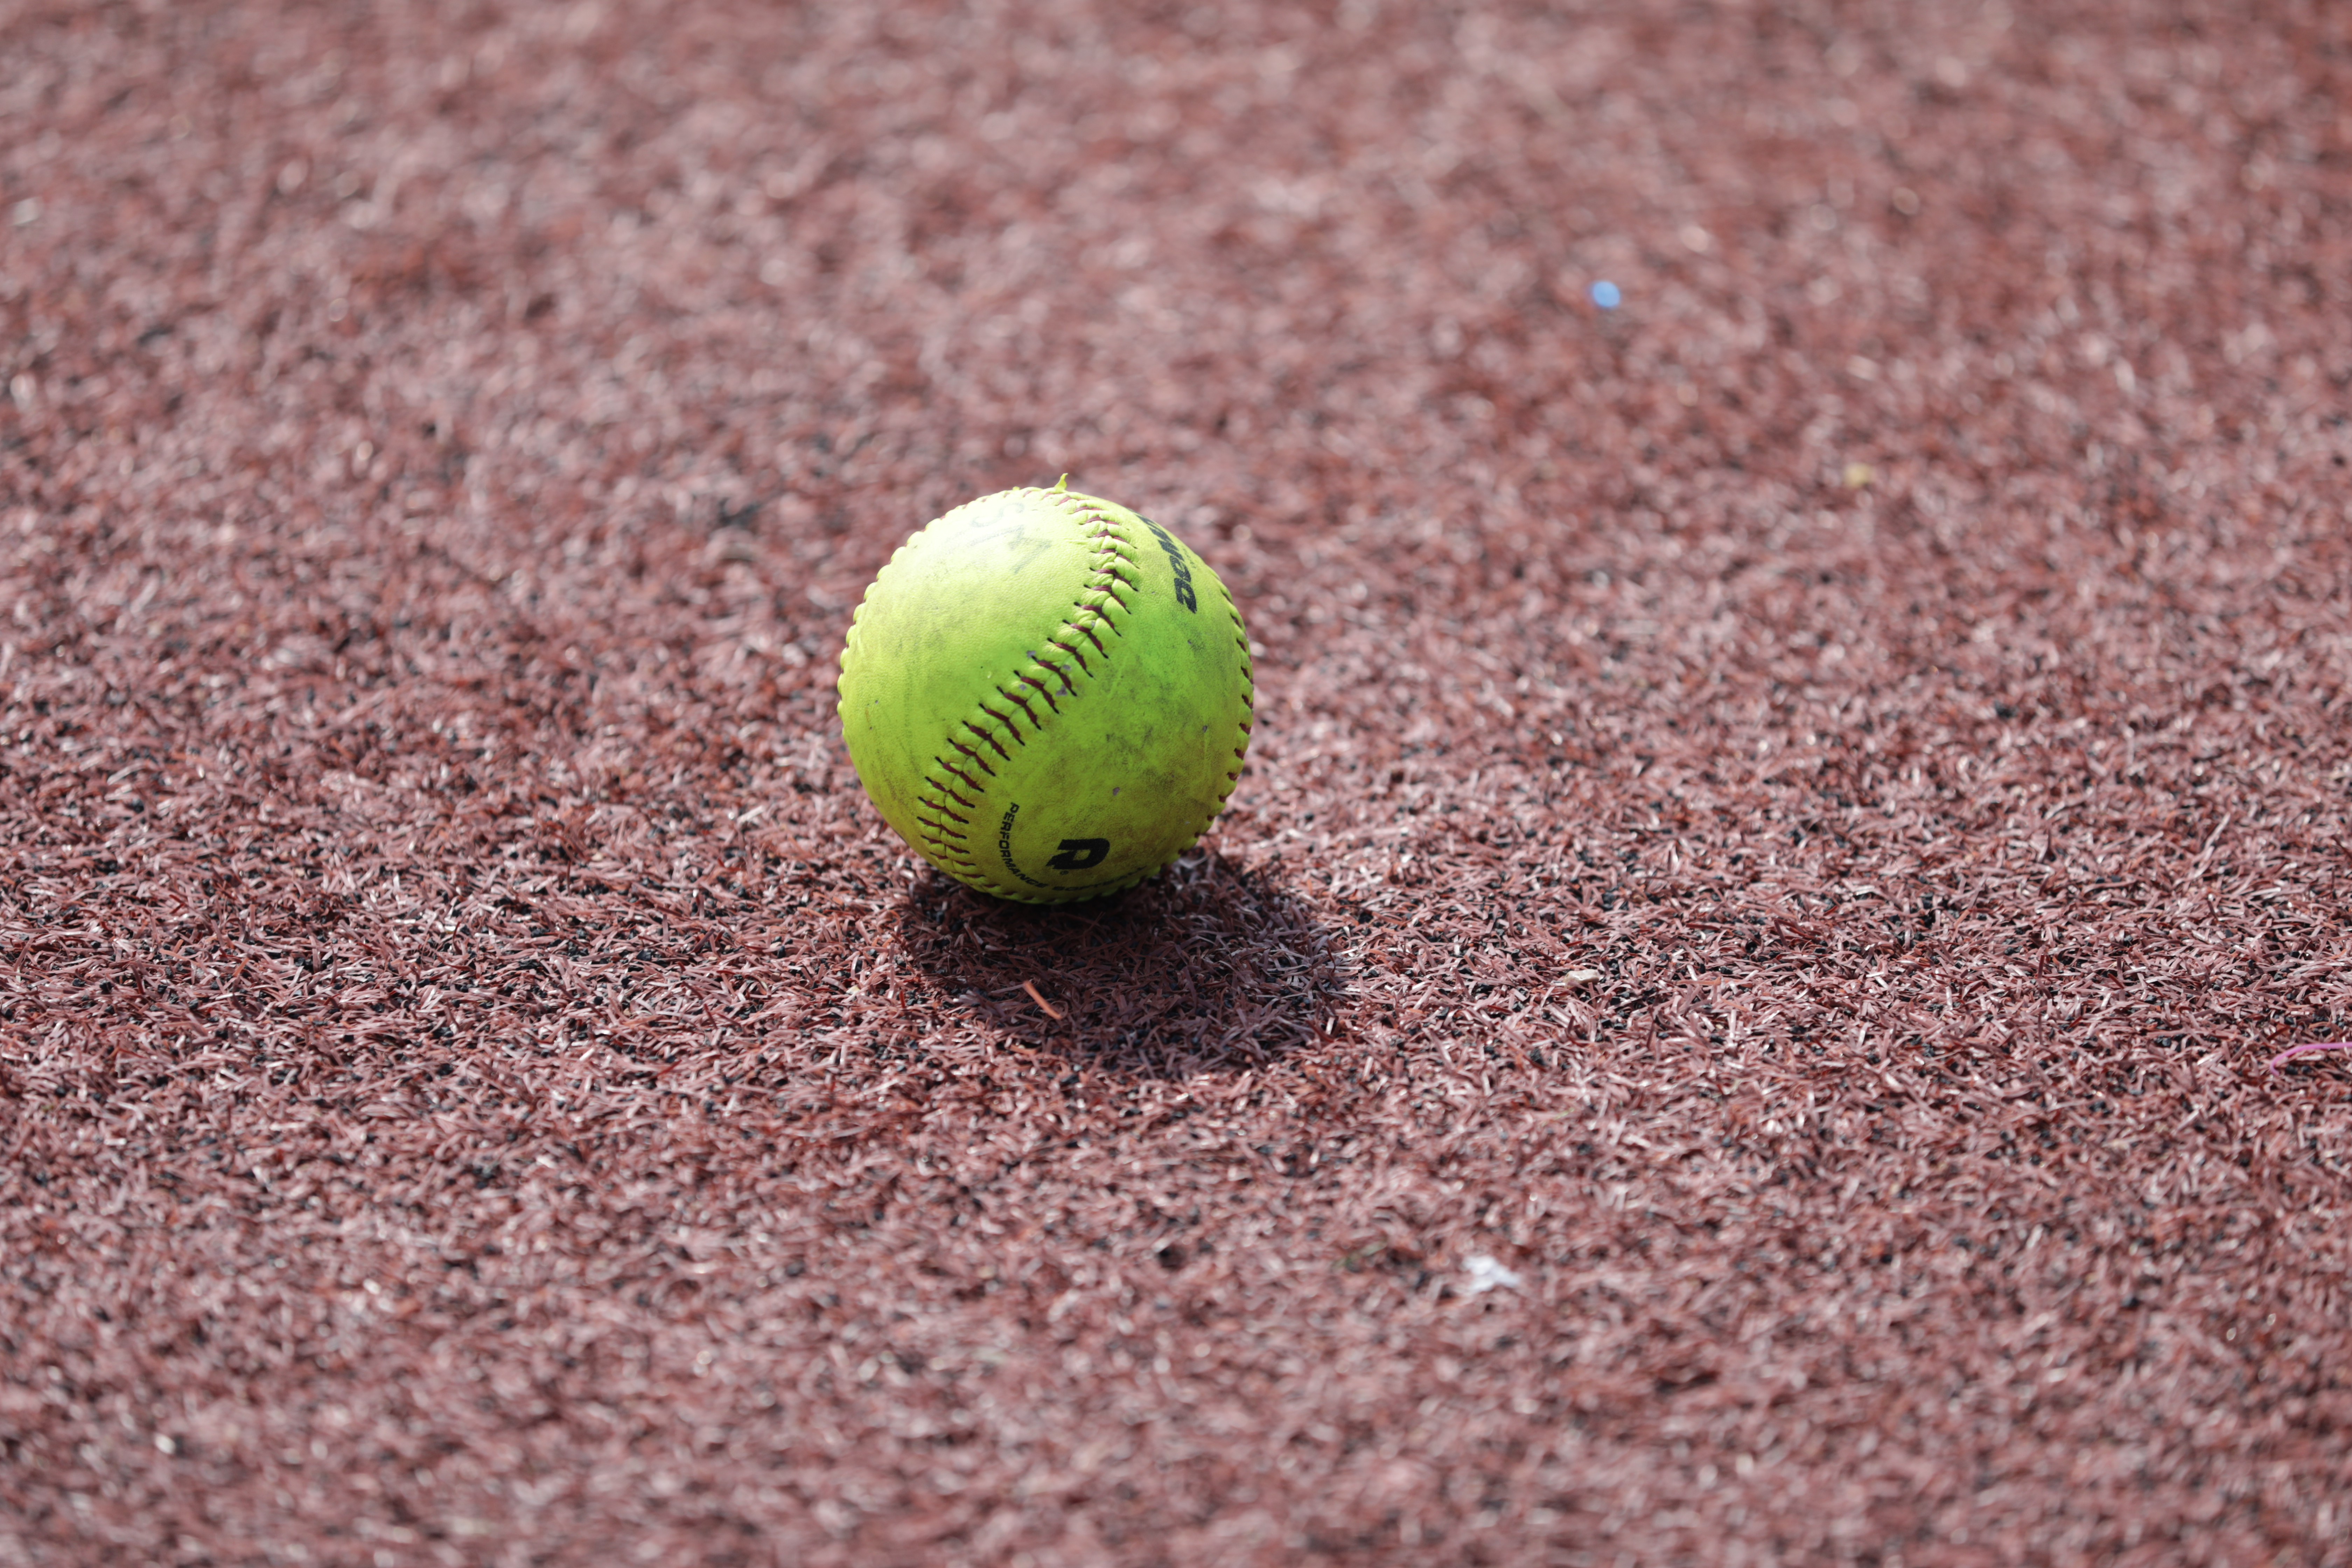 USA Softball National Office seeks Membership Services Manager featured image